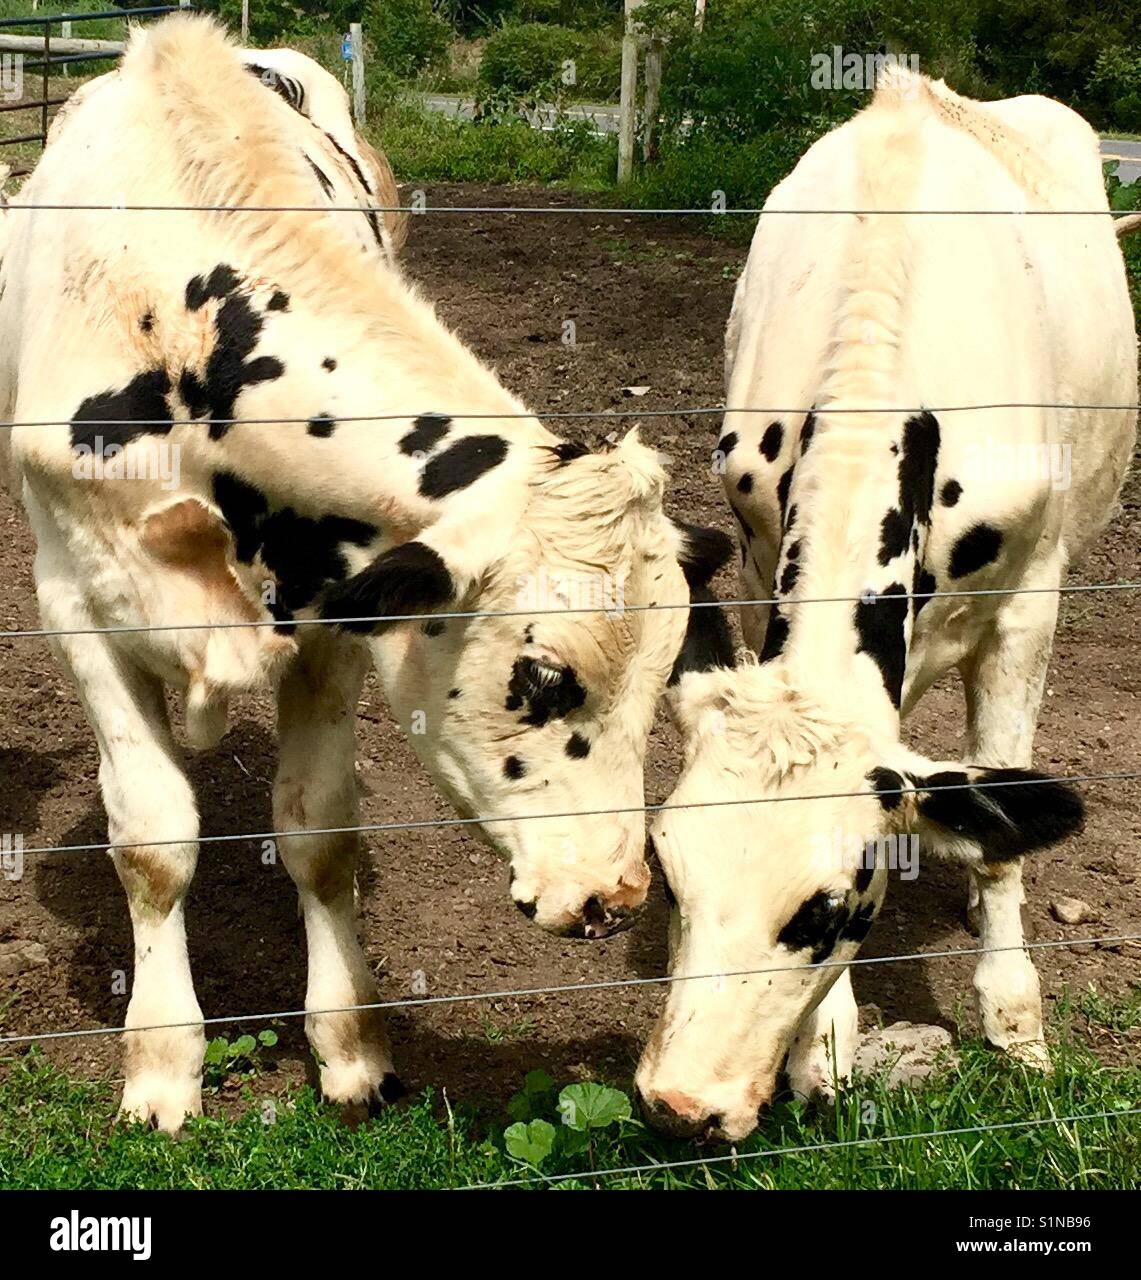 2 White cows with black spots, heads together, 'what did you find one cow appears to say to the other cow' Stock Photo